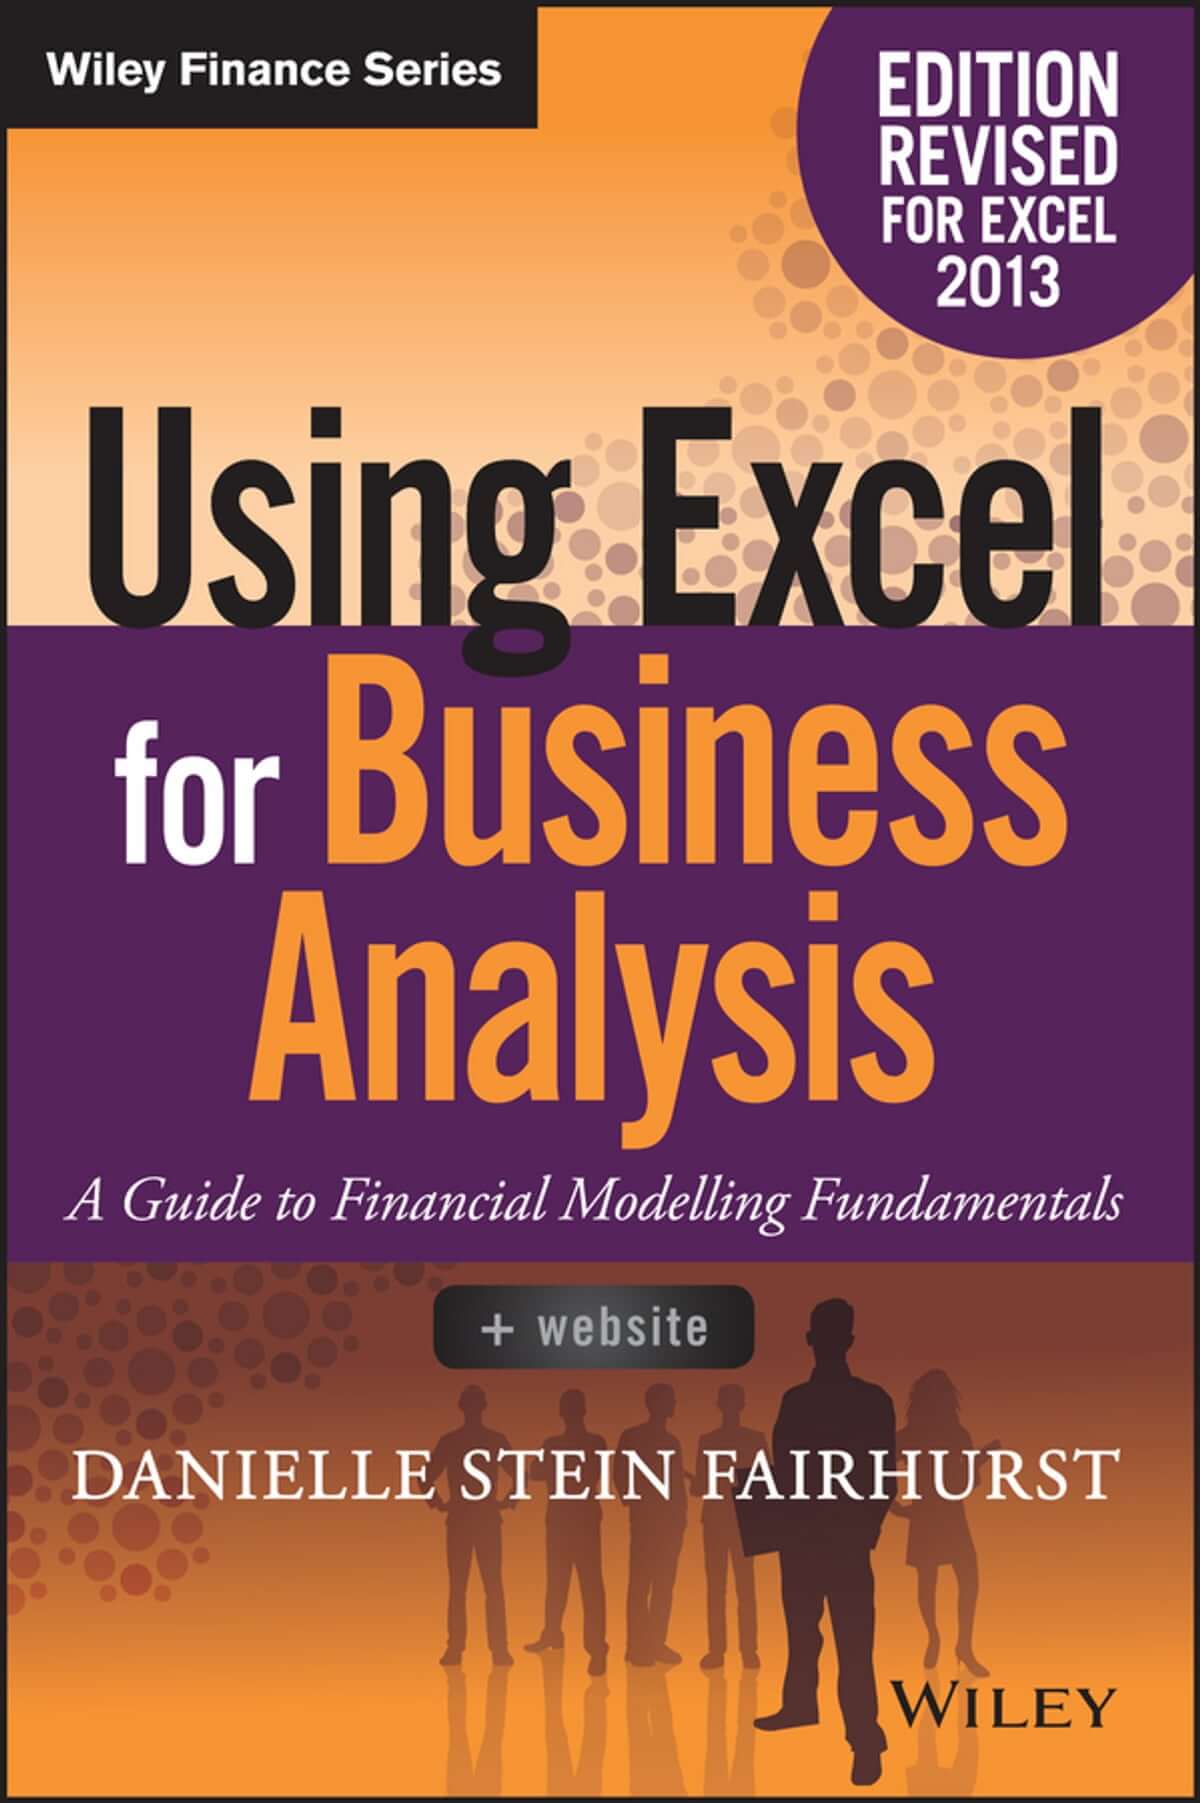 Using Excel for Business Analysis: A Guide to Financial Modelling Fundamentals by Danielle Stein Fairhurst